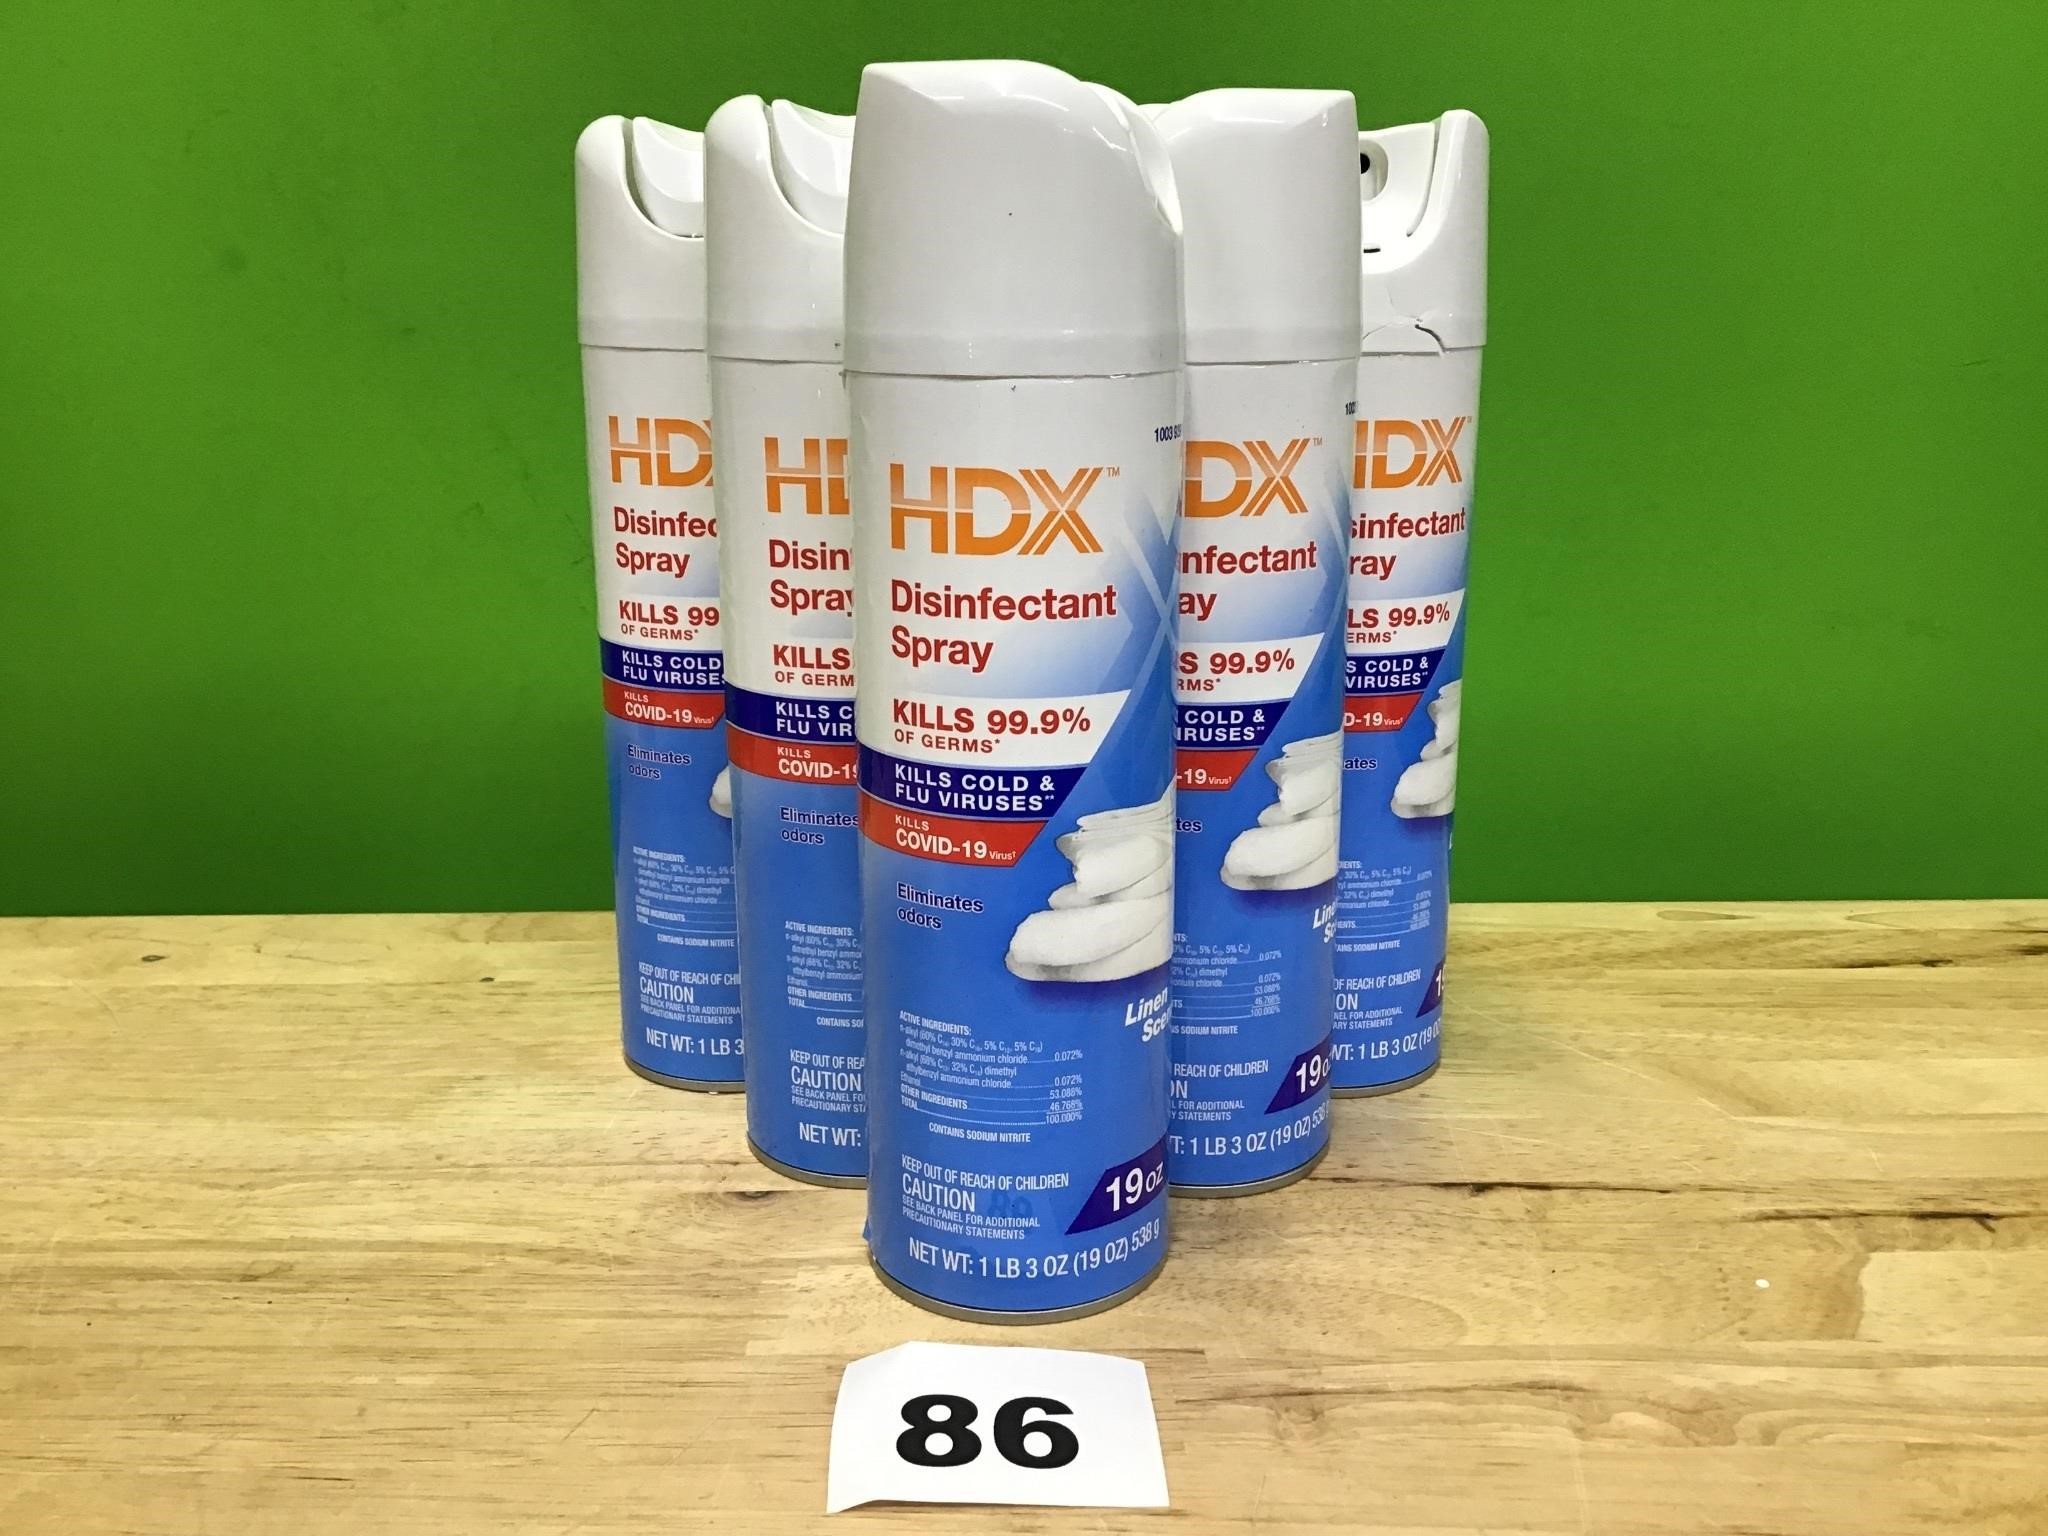 HDX Disinfectant Spray lot of 6